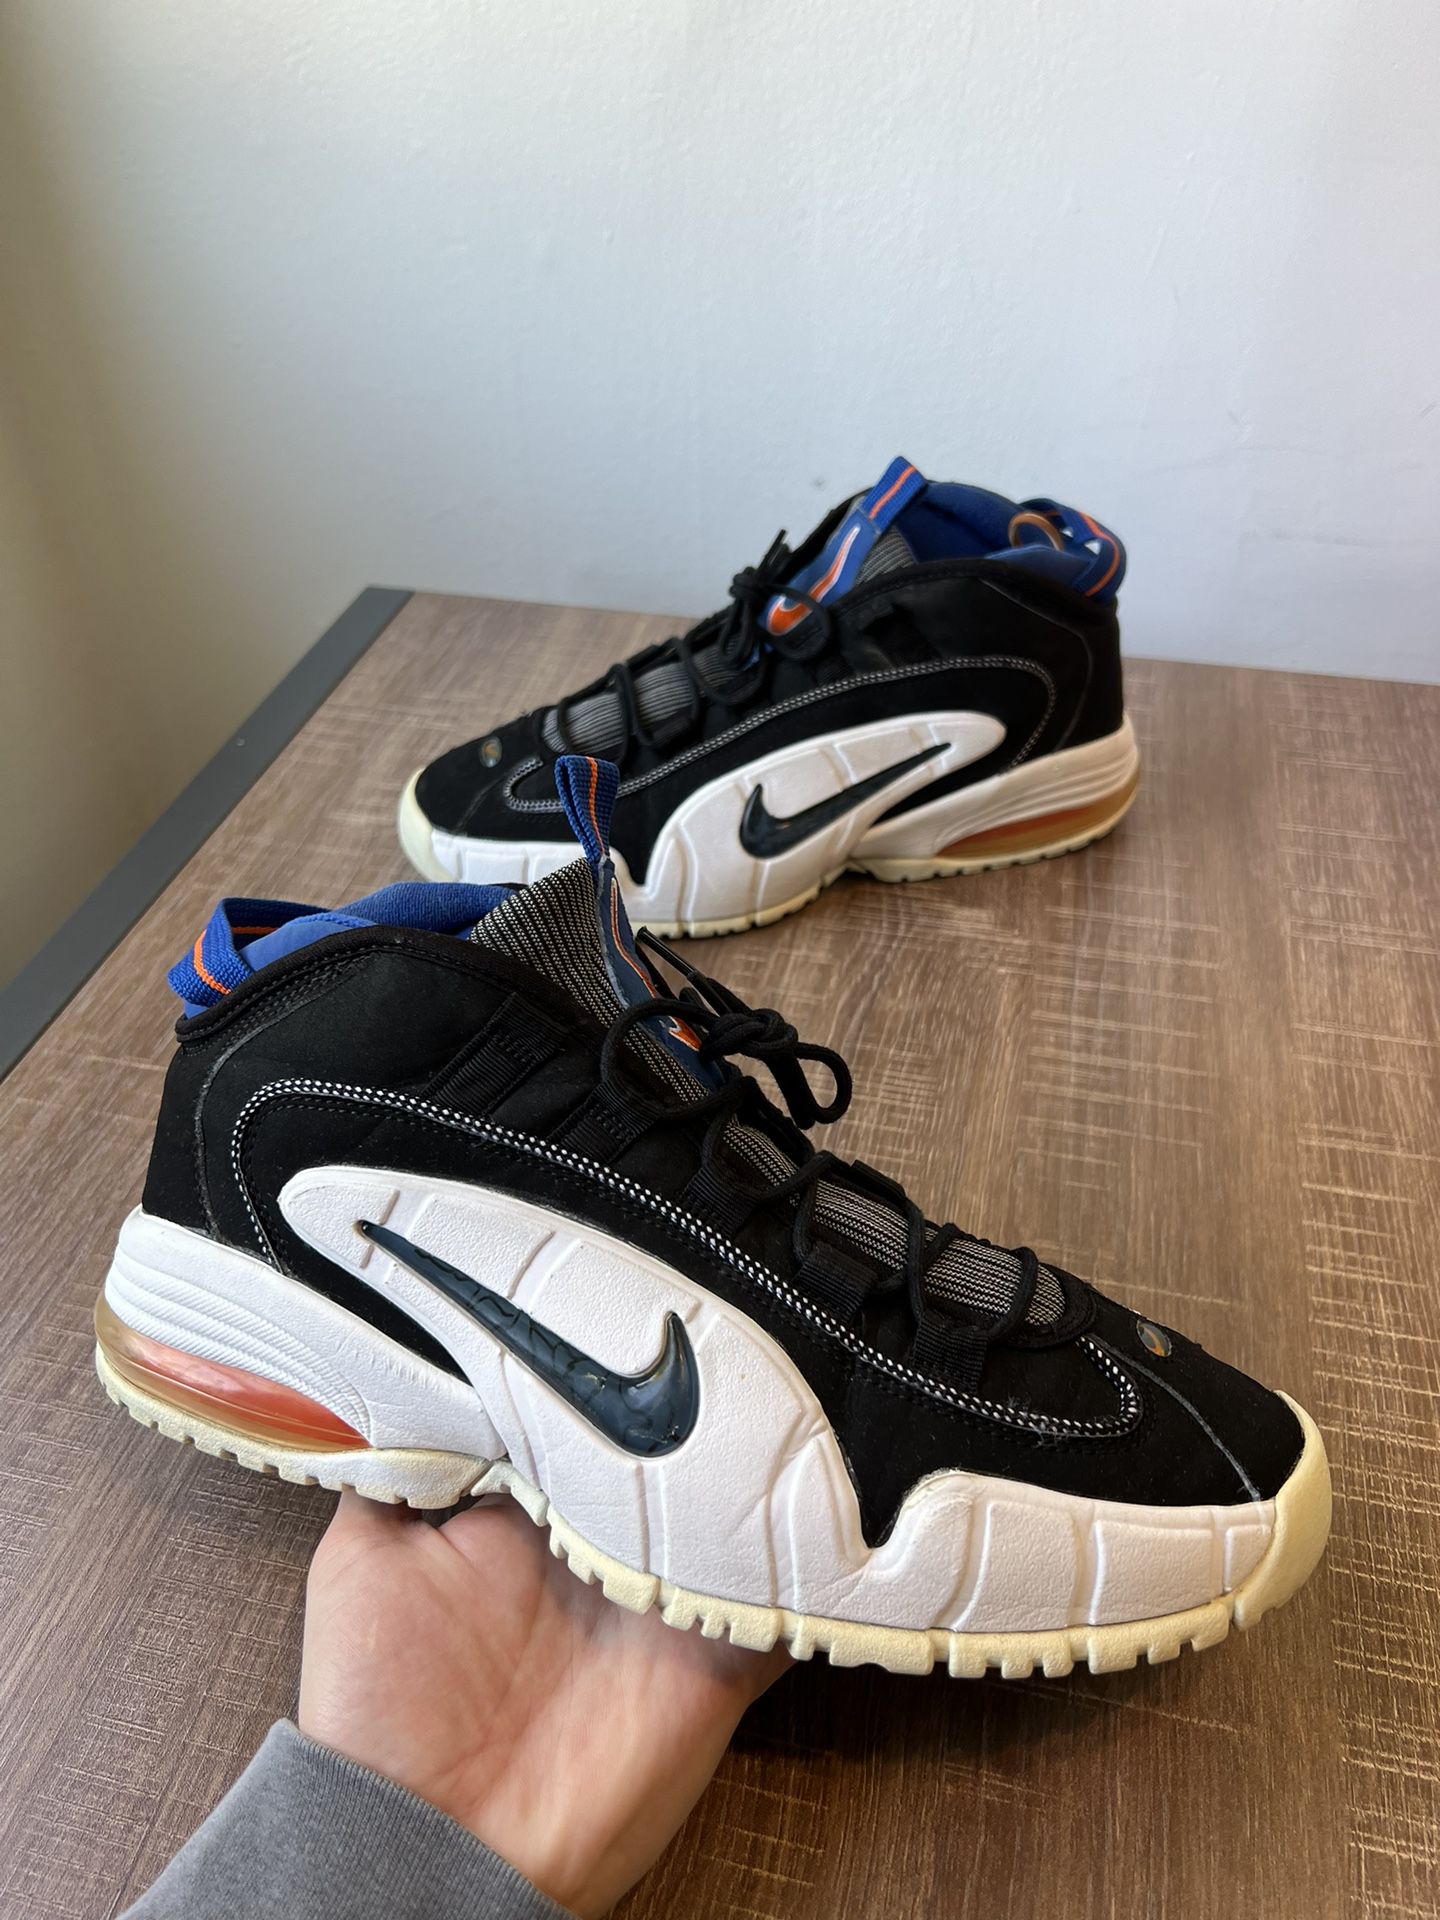 Nike Air MAX PENNY "KNICKS" 624017-041 MENS 12 Shoes Sneakers